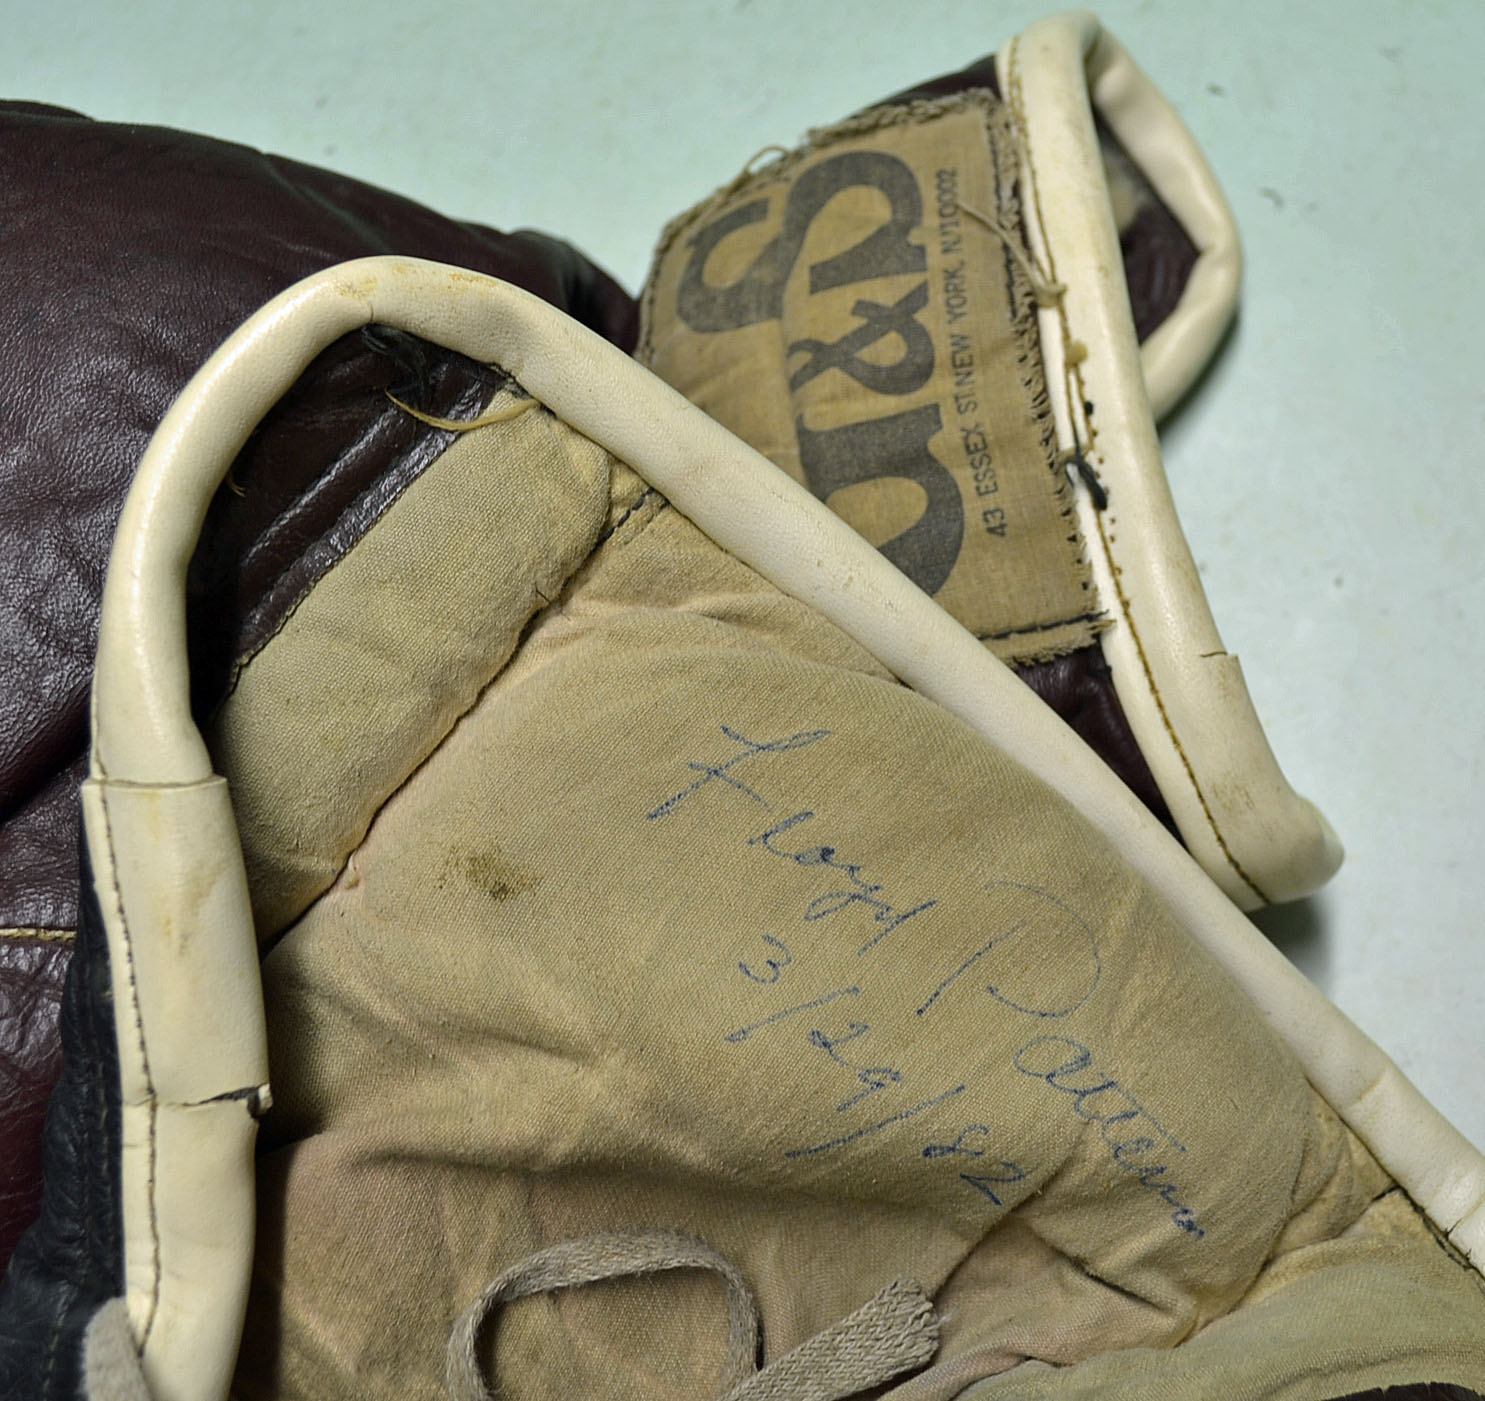 Floyd Patterson – Heavy Weight Champion of World – Boxing Gloves. Floyd Patterson worn boxing gloves